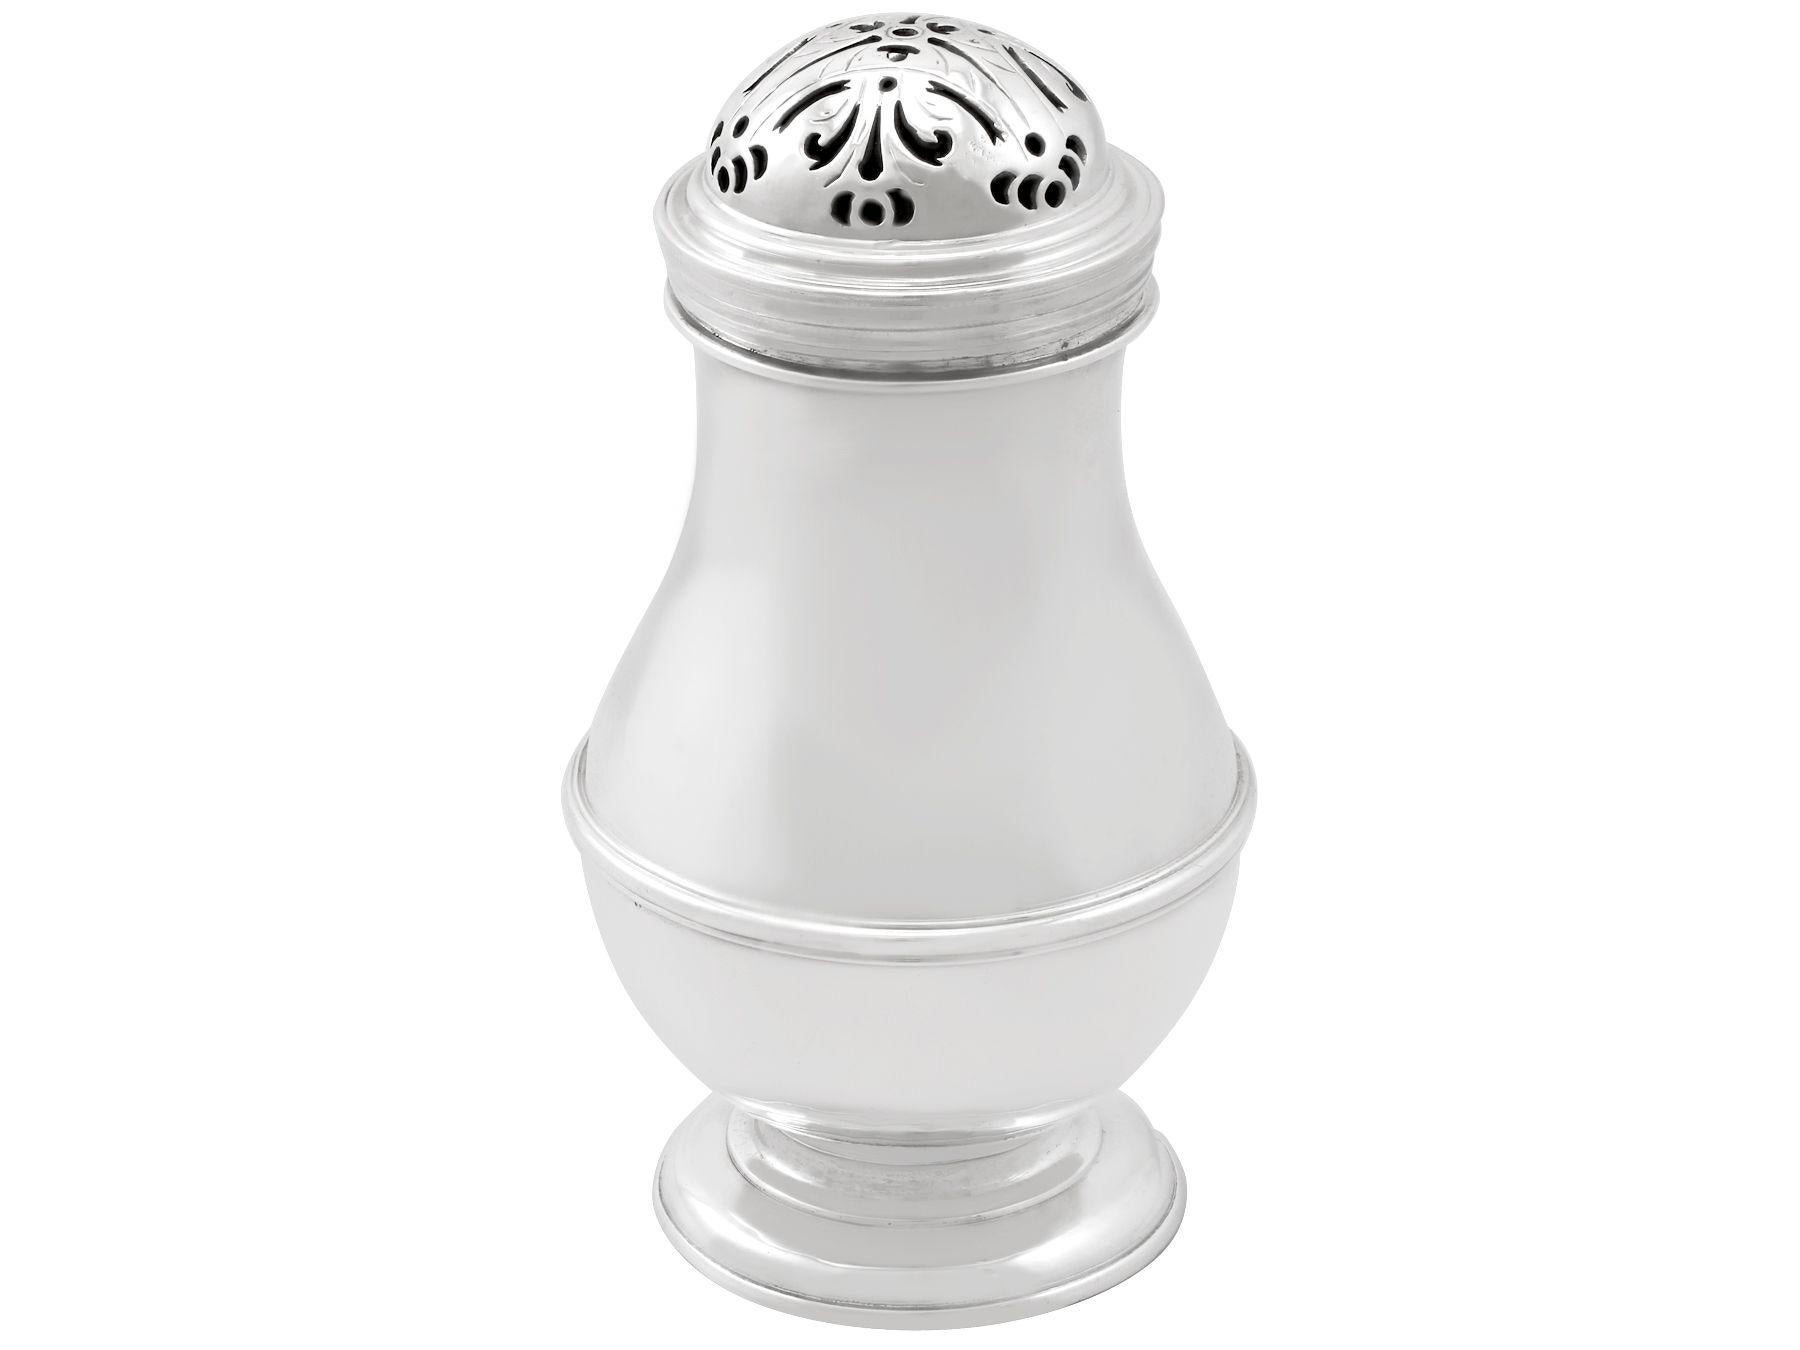 An exceptional, fine and impressive, large antique Georgian Britannia standard silver pepper Shaker; an addition to our silver cruets/condiments collection.

This exceptional antique Georgian Britannia standard* silver pepper Shaker has a plain